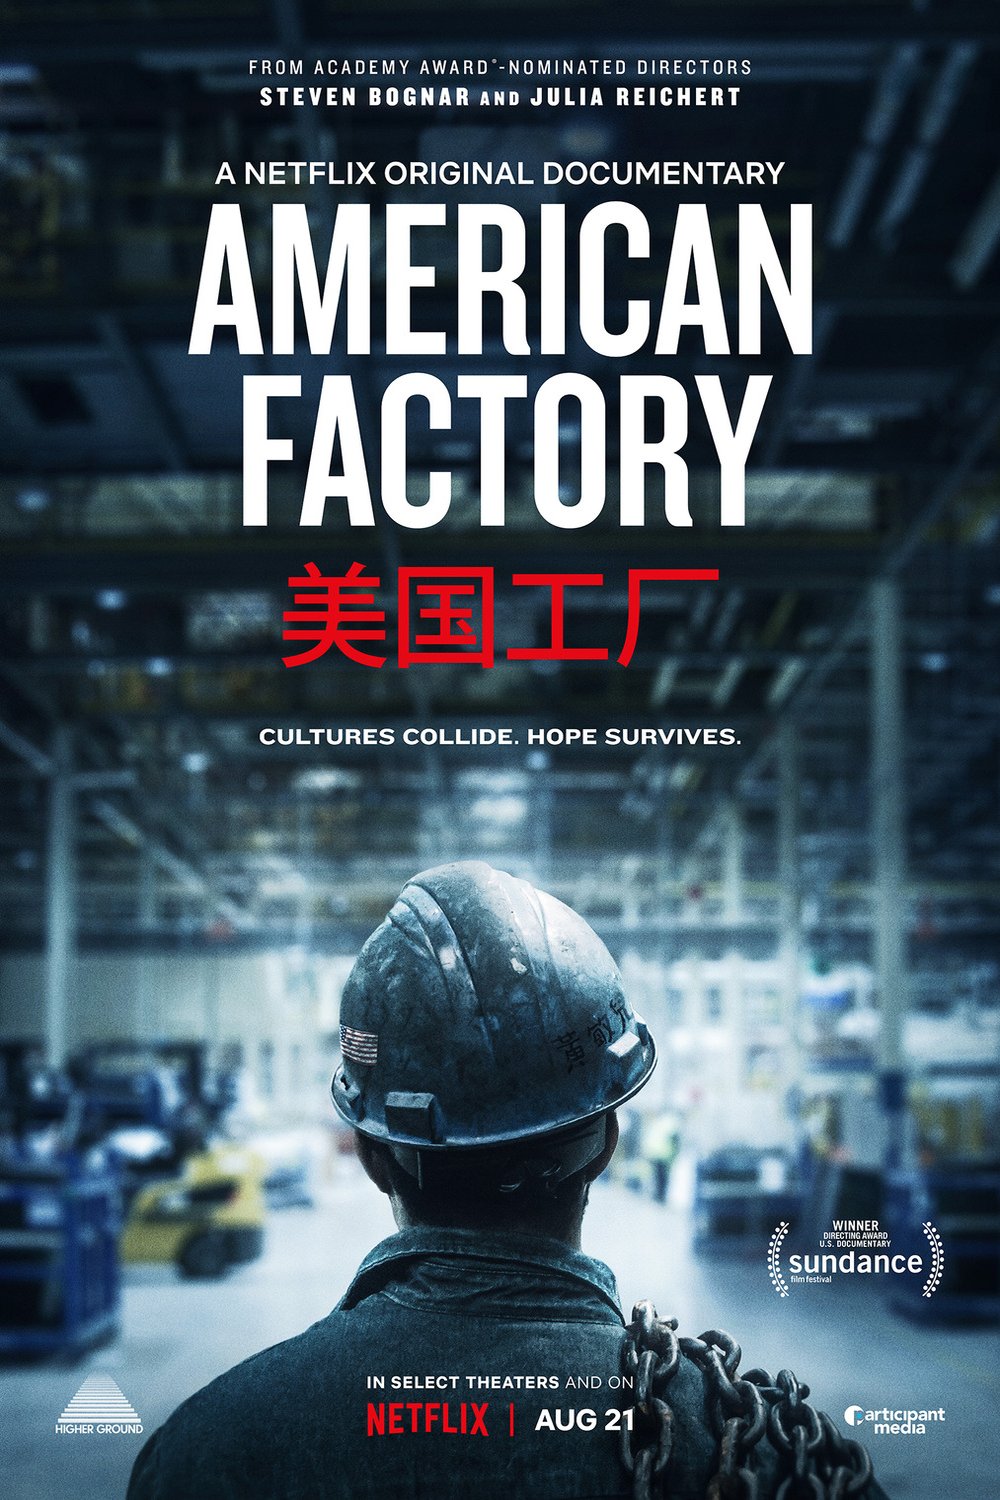 Poster of the movie American Factory